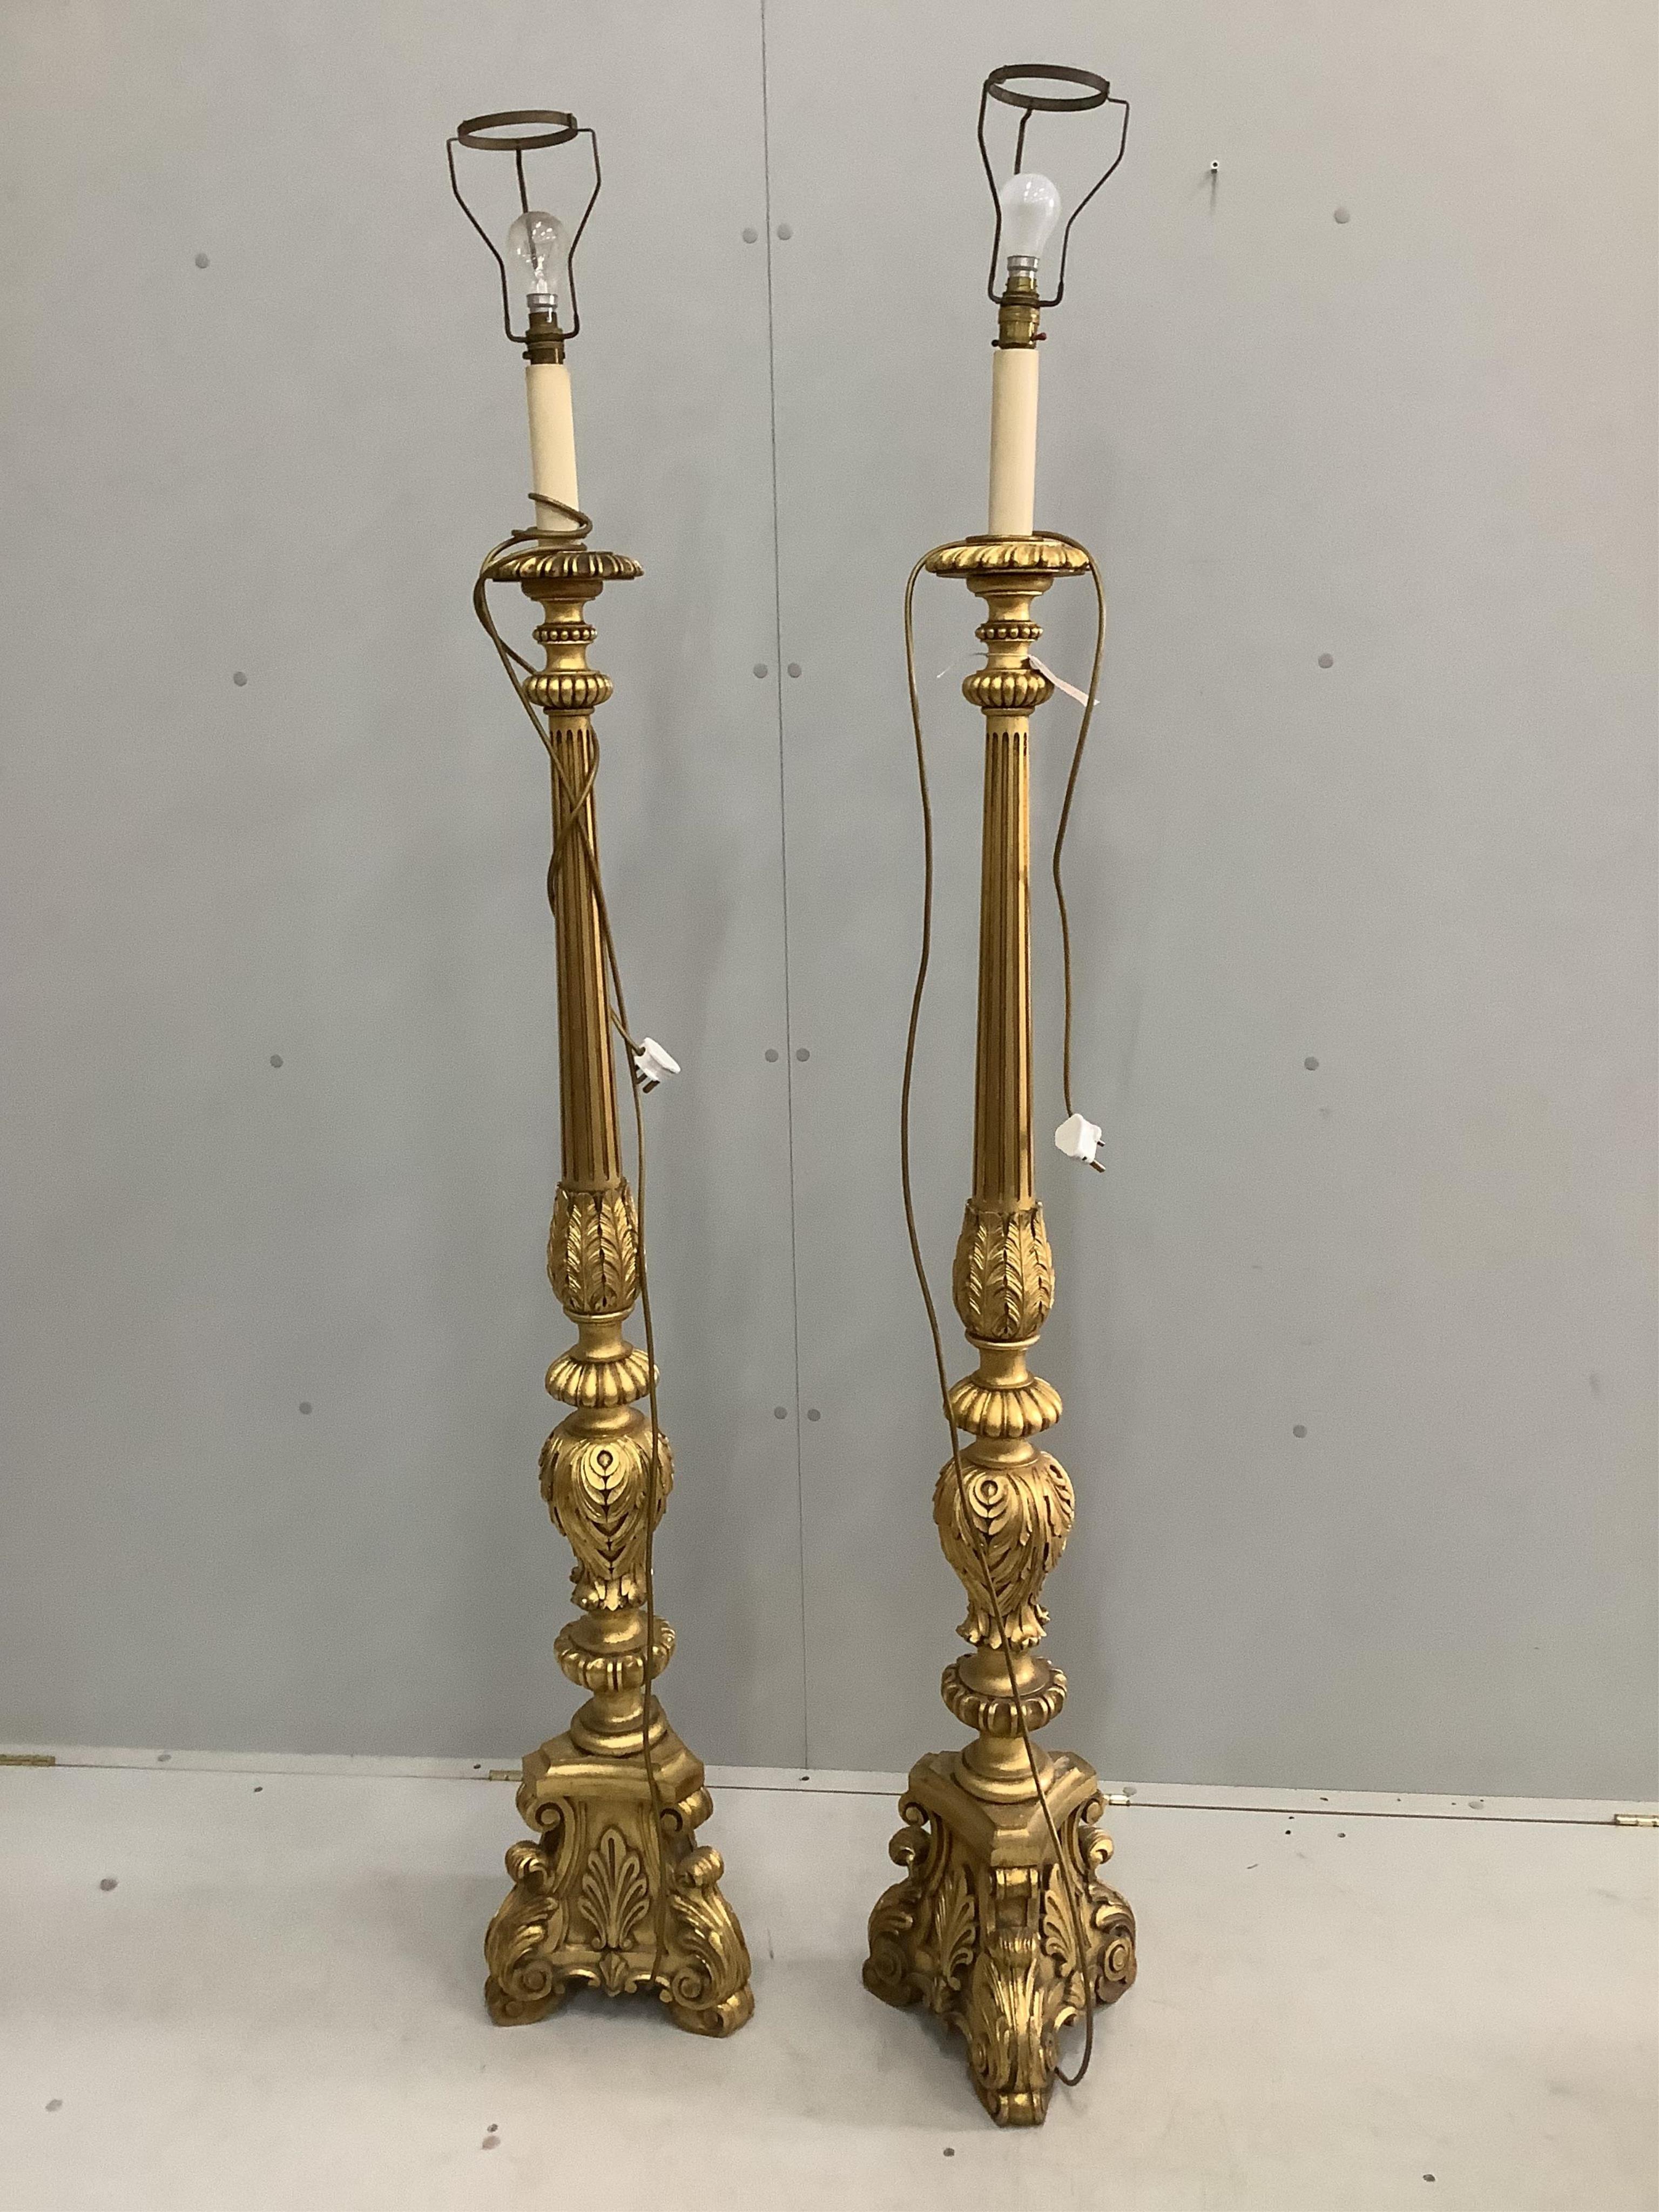 A pair of 18th century style giltwood standard lamps, height including shades 190cm. Condition - good